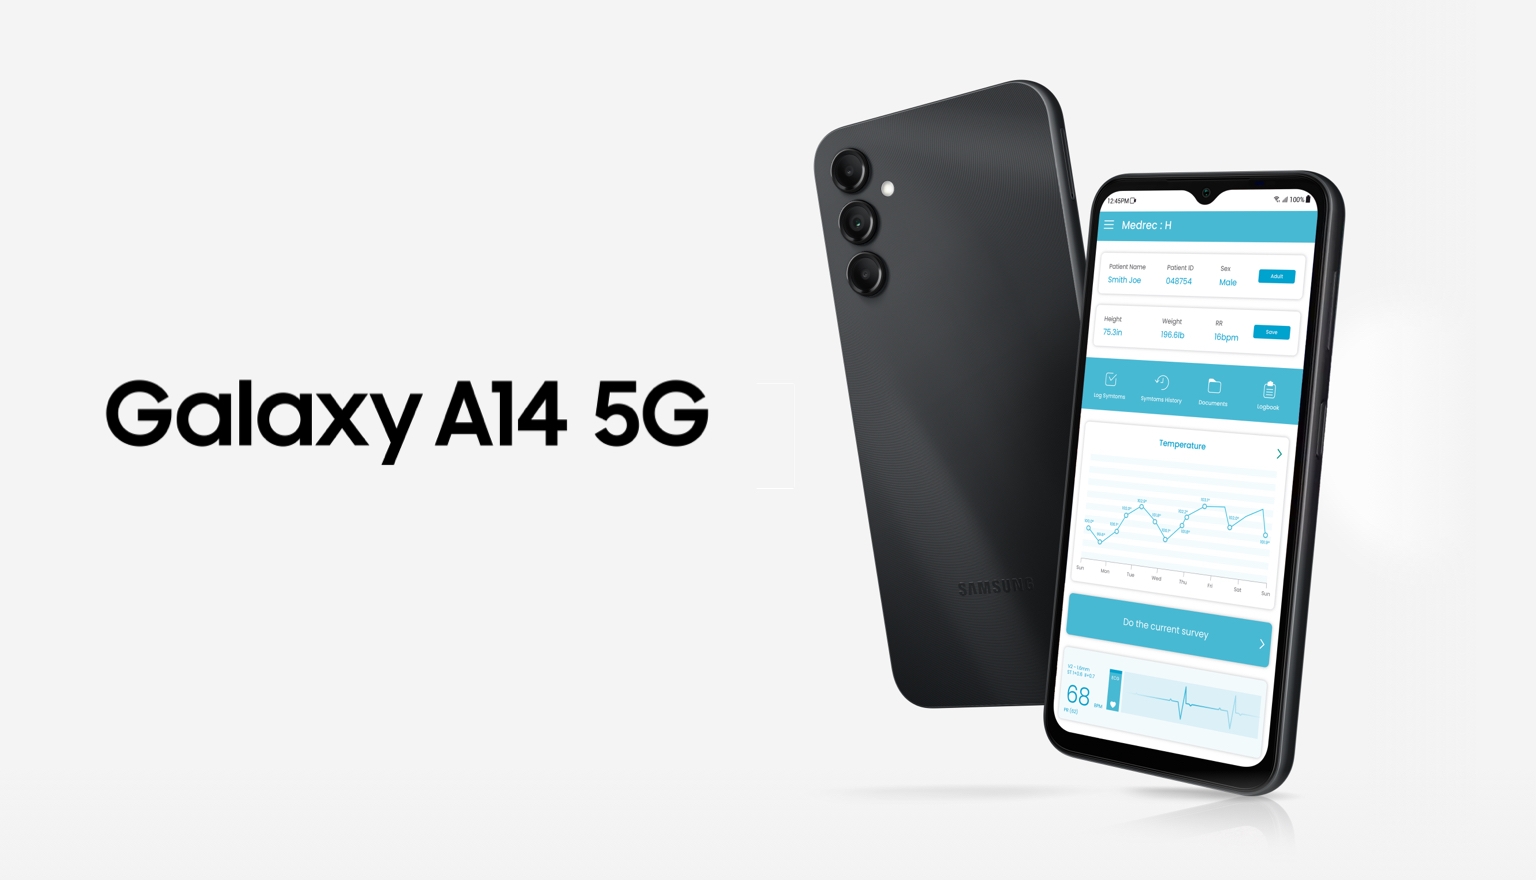 Samsung Galaxy A14 5G: black from Cox Mobile